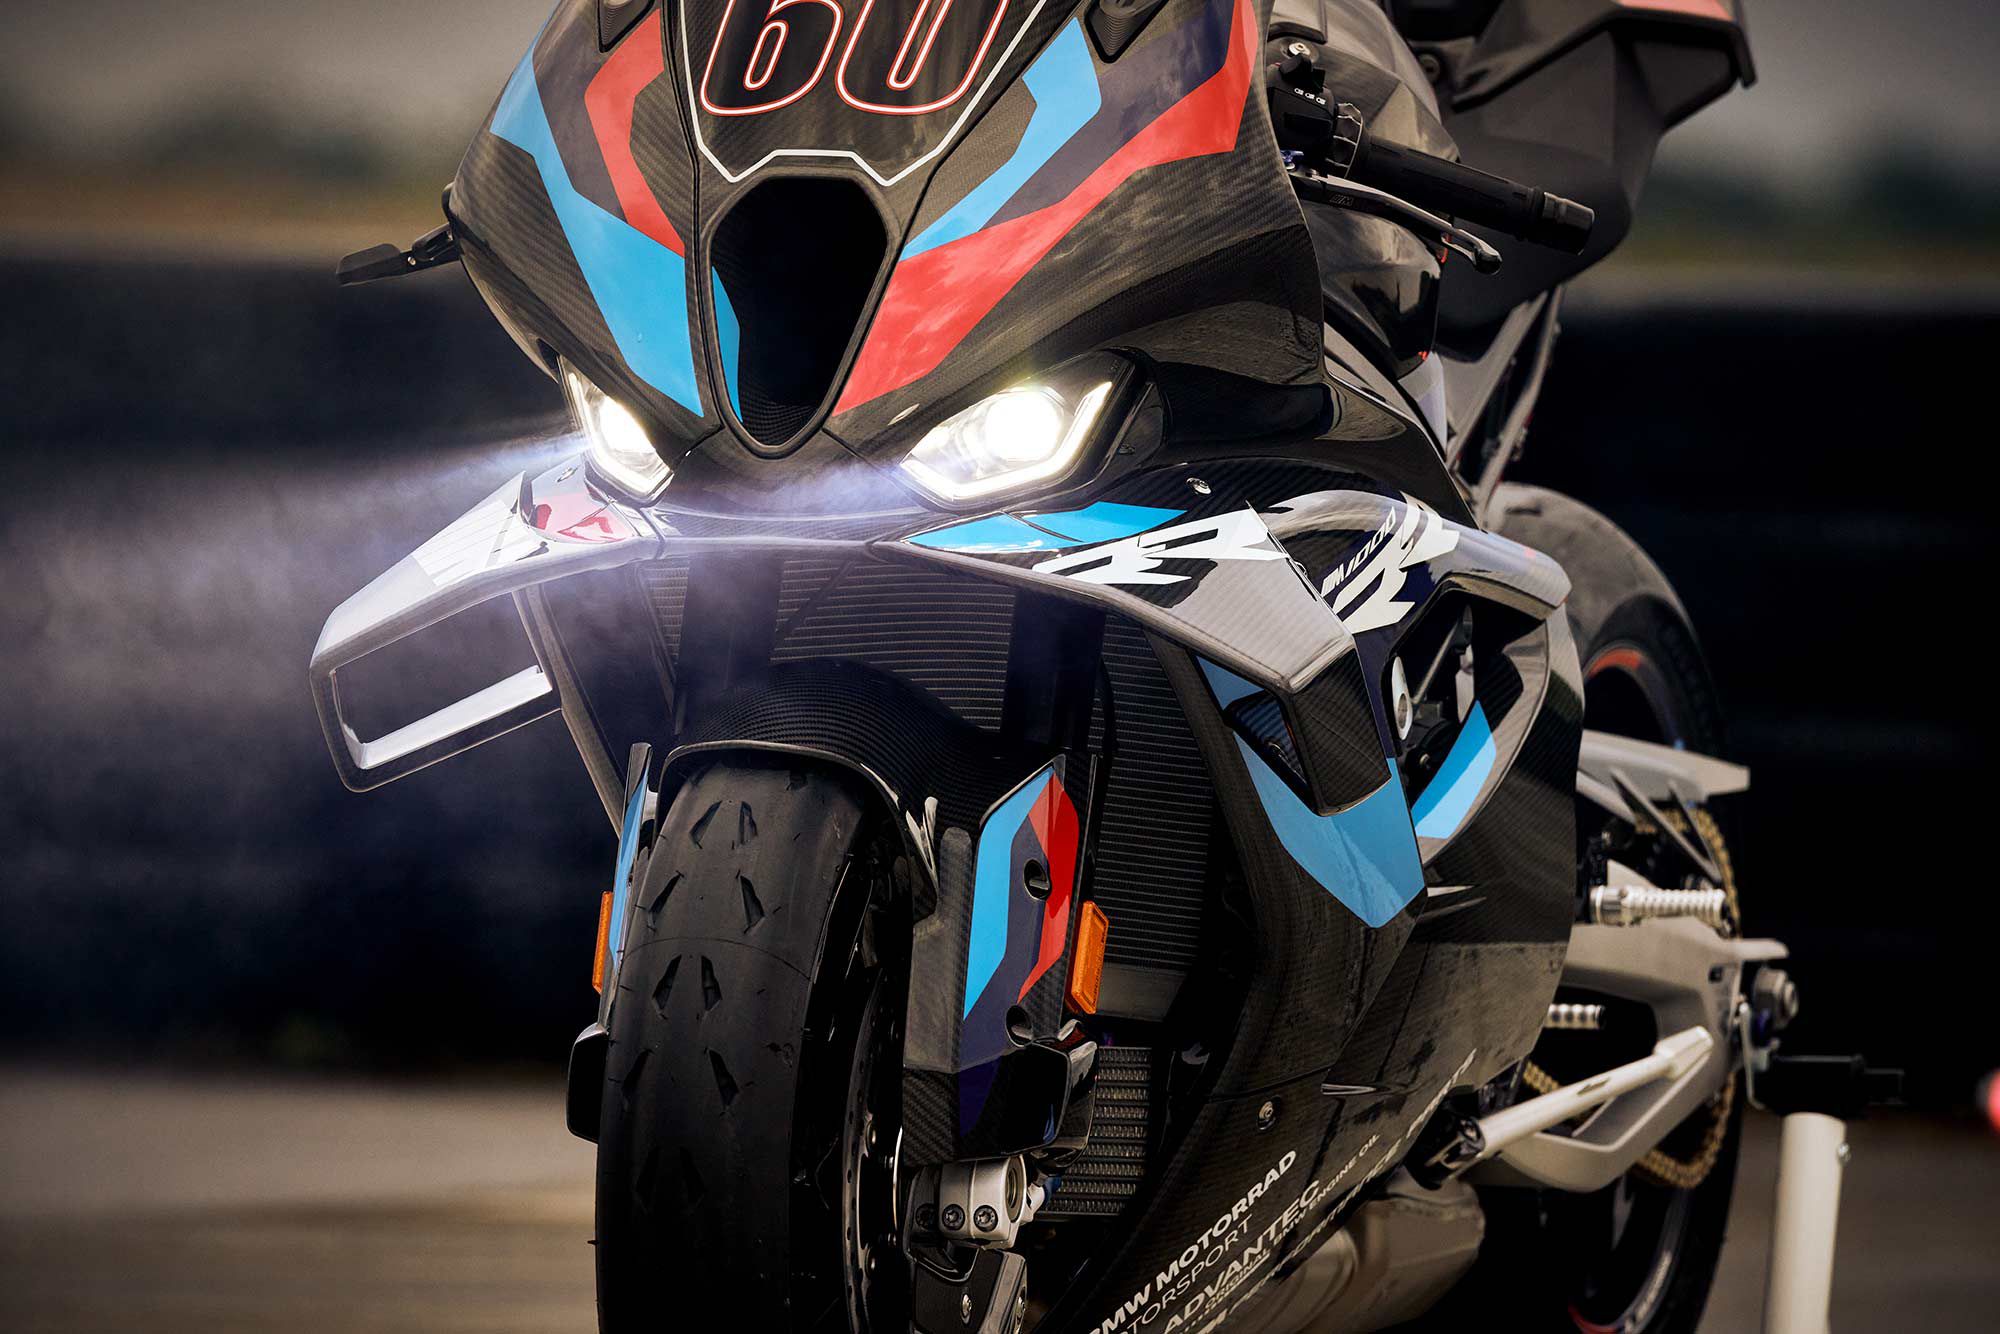 Another view of the BMW M 1000 RR’s revised front aerodynamics.